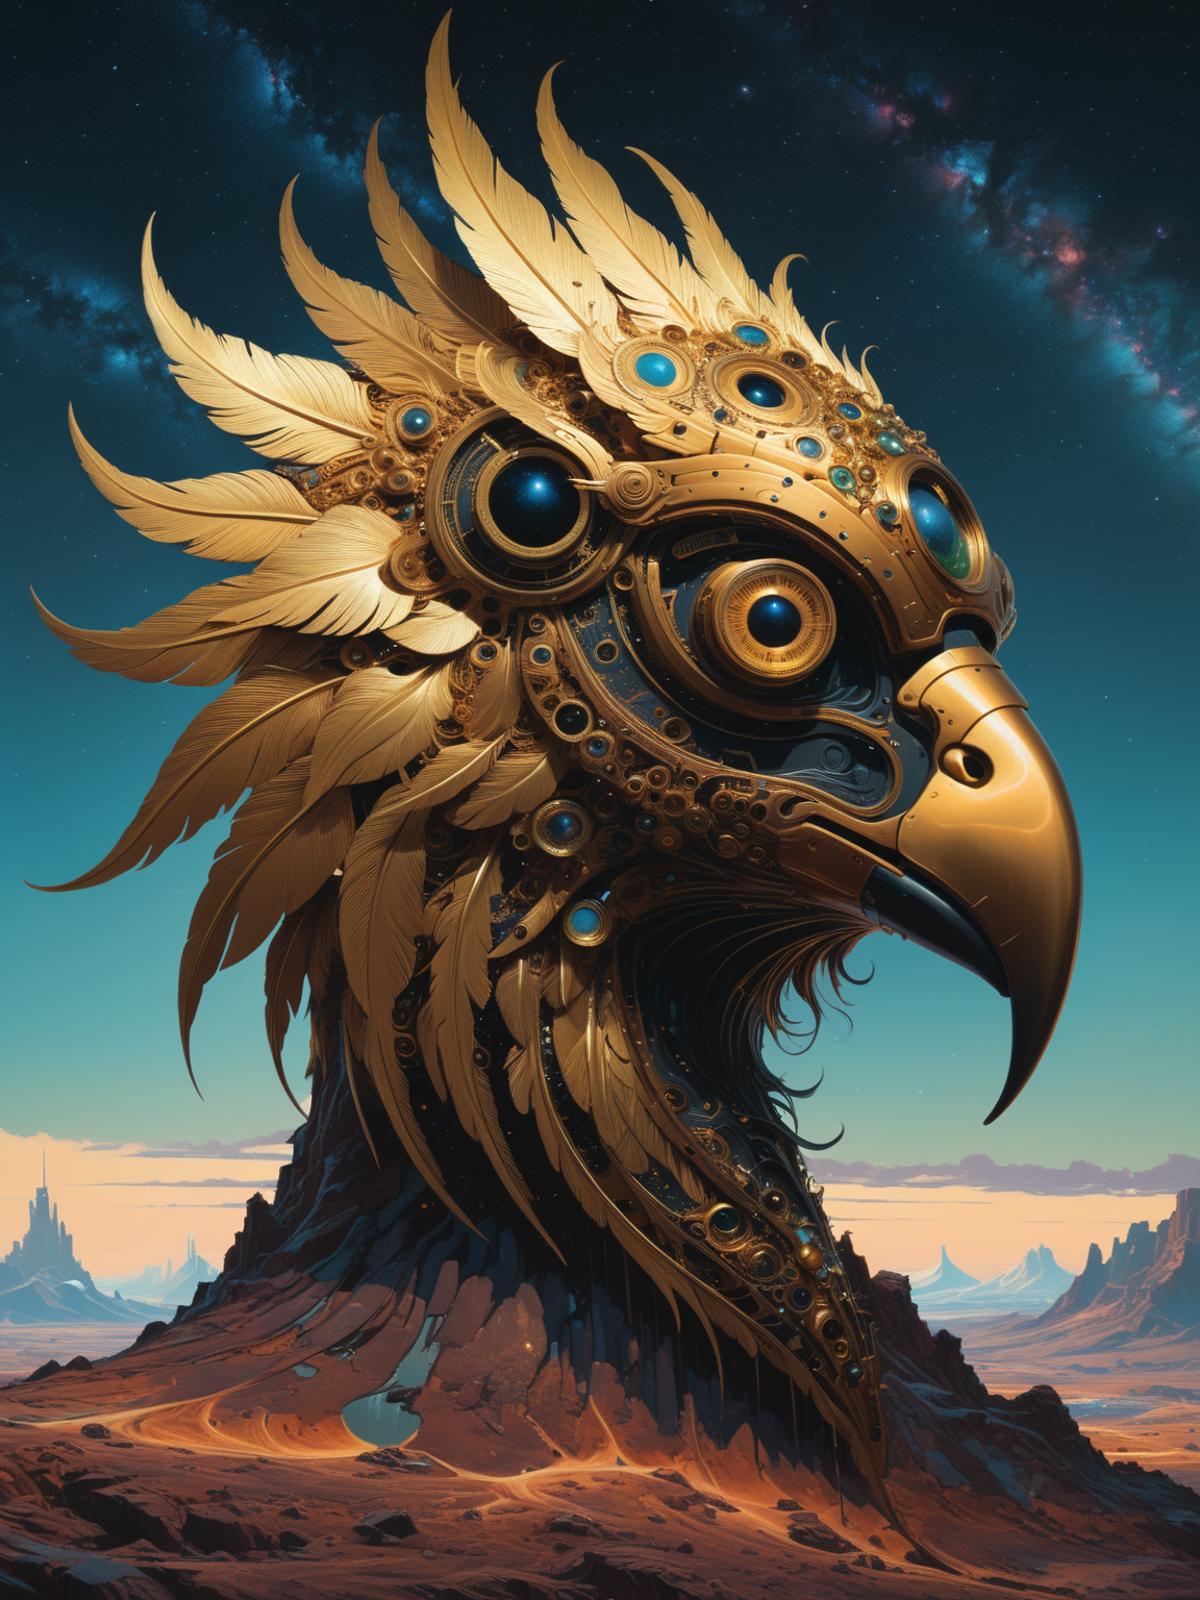 Golden robotic bird statue with blue eyes and feathers in front of a mountain range.